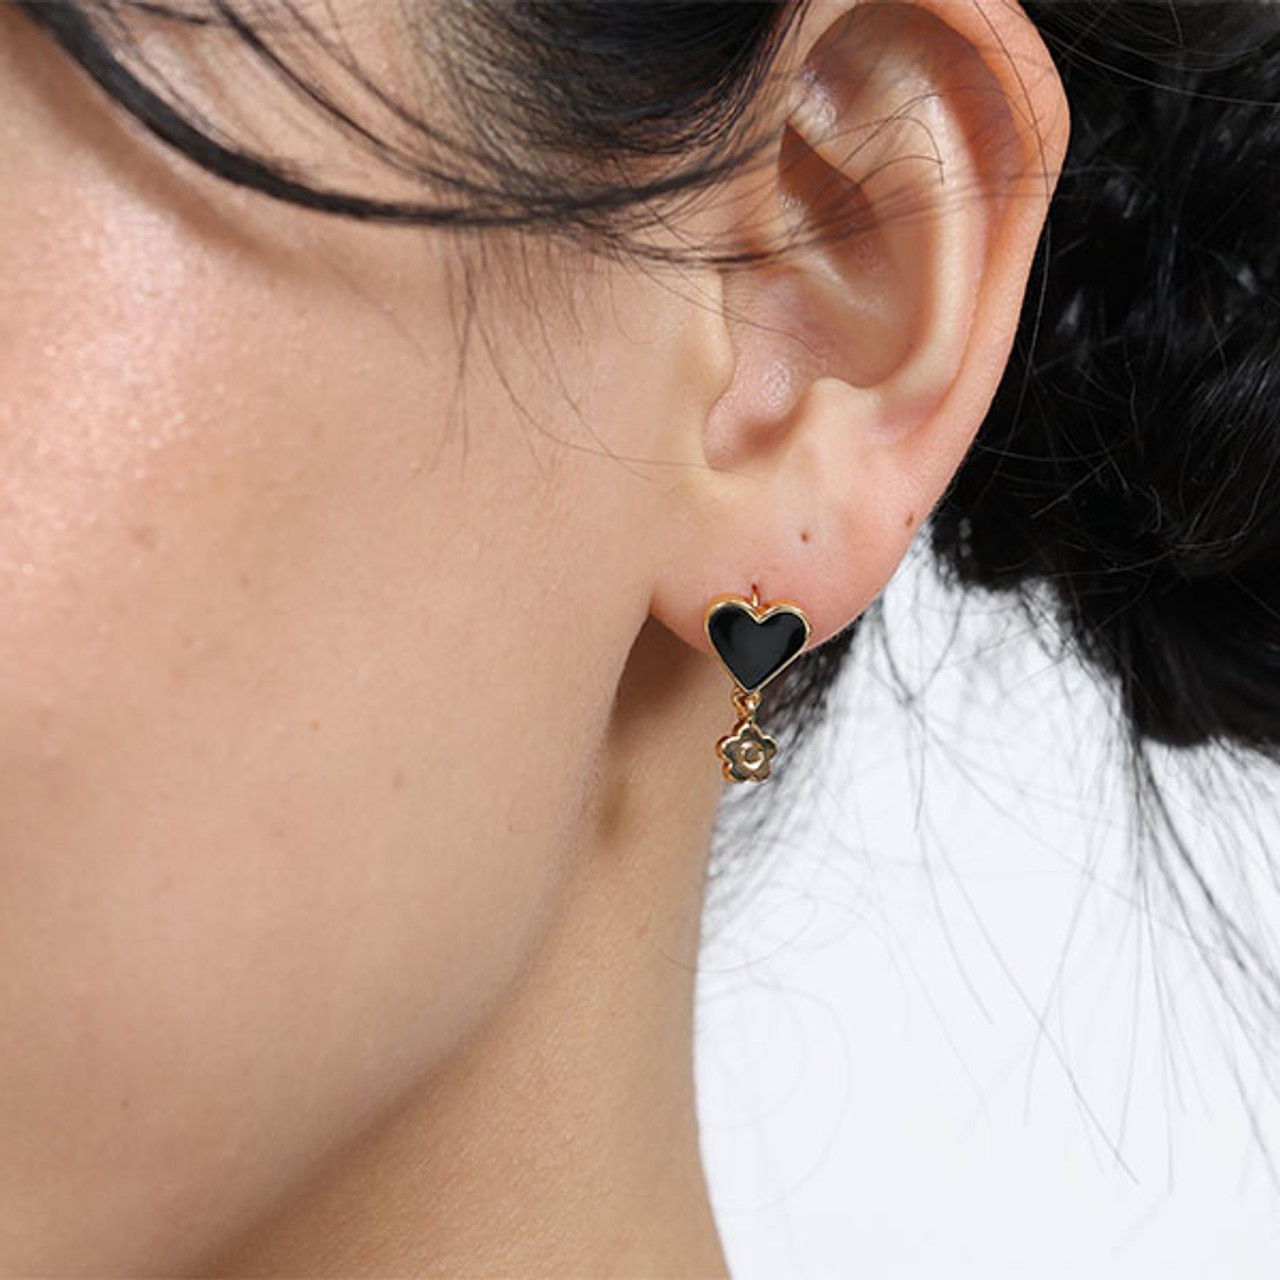 Black heart shaped resin earrings with a small gold Mary Quant daisy dangling from the bottom of the heart as worn by a model.